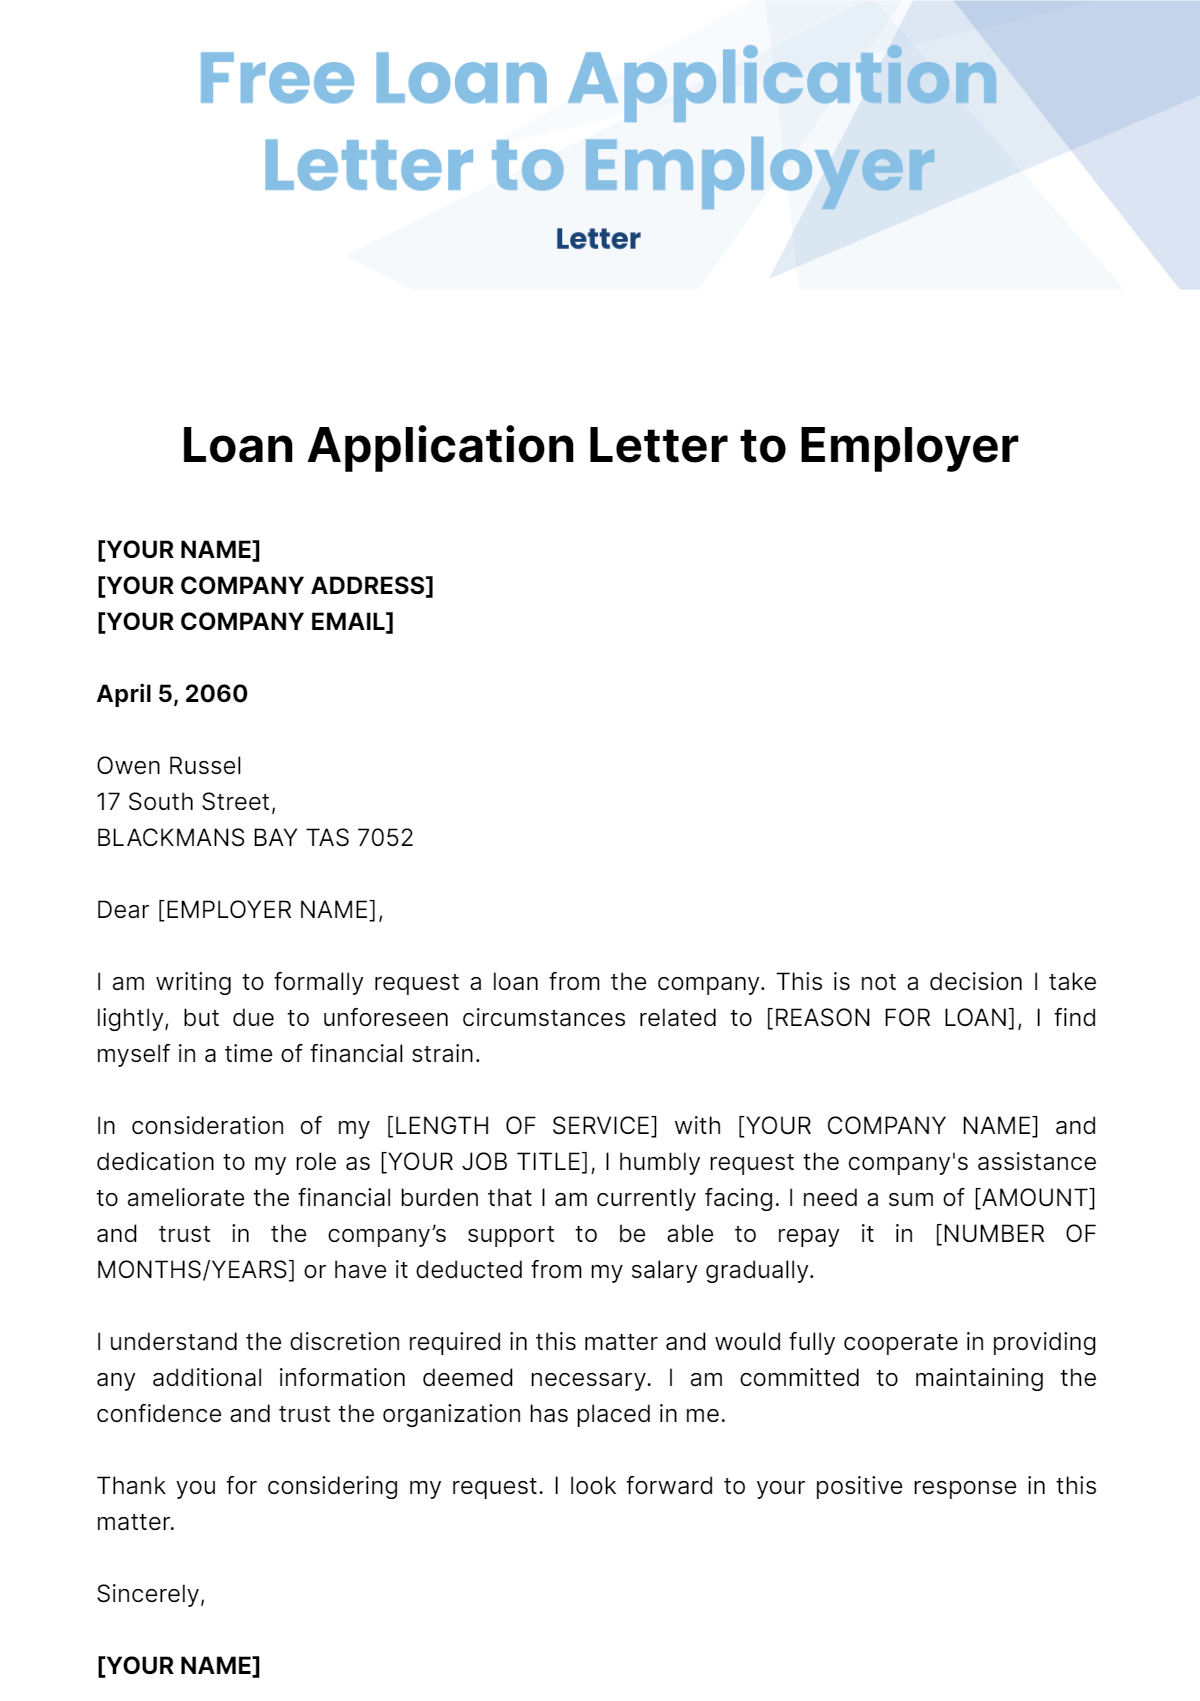 Free Loan Application Letter to Employer Template